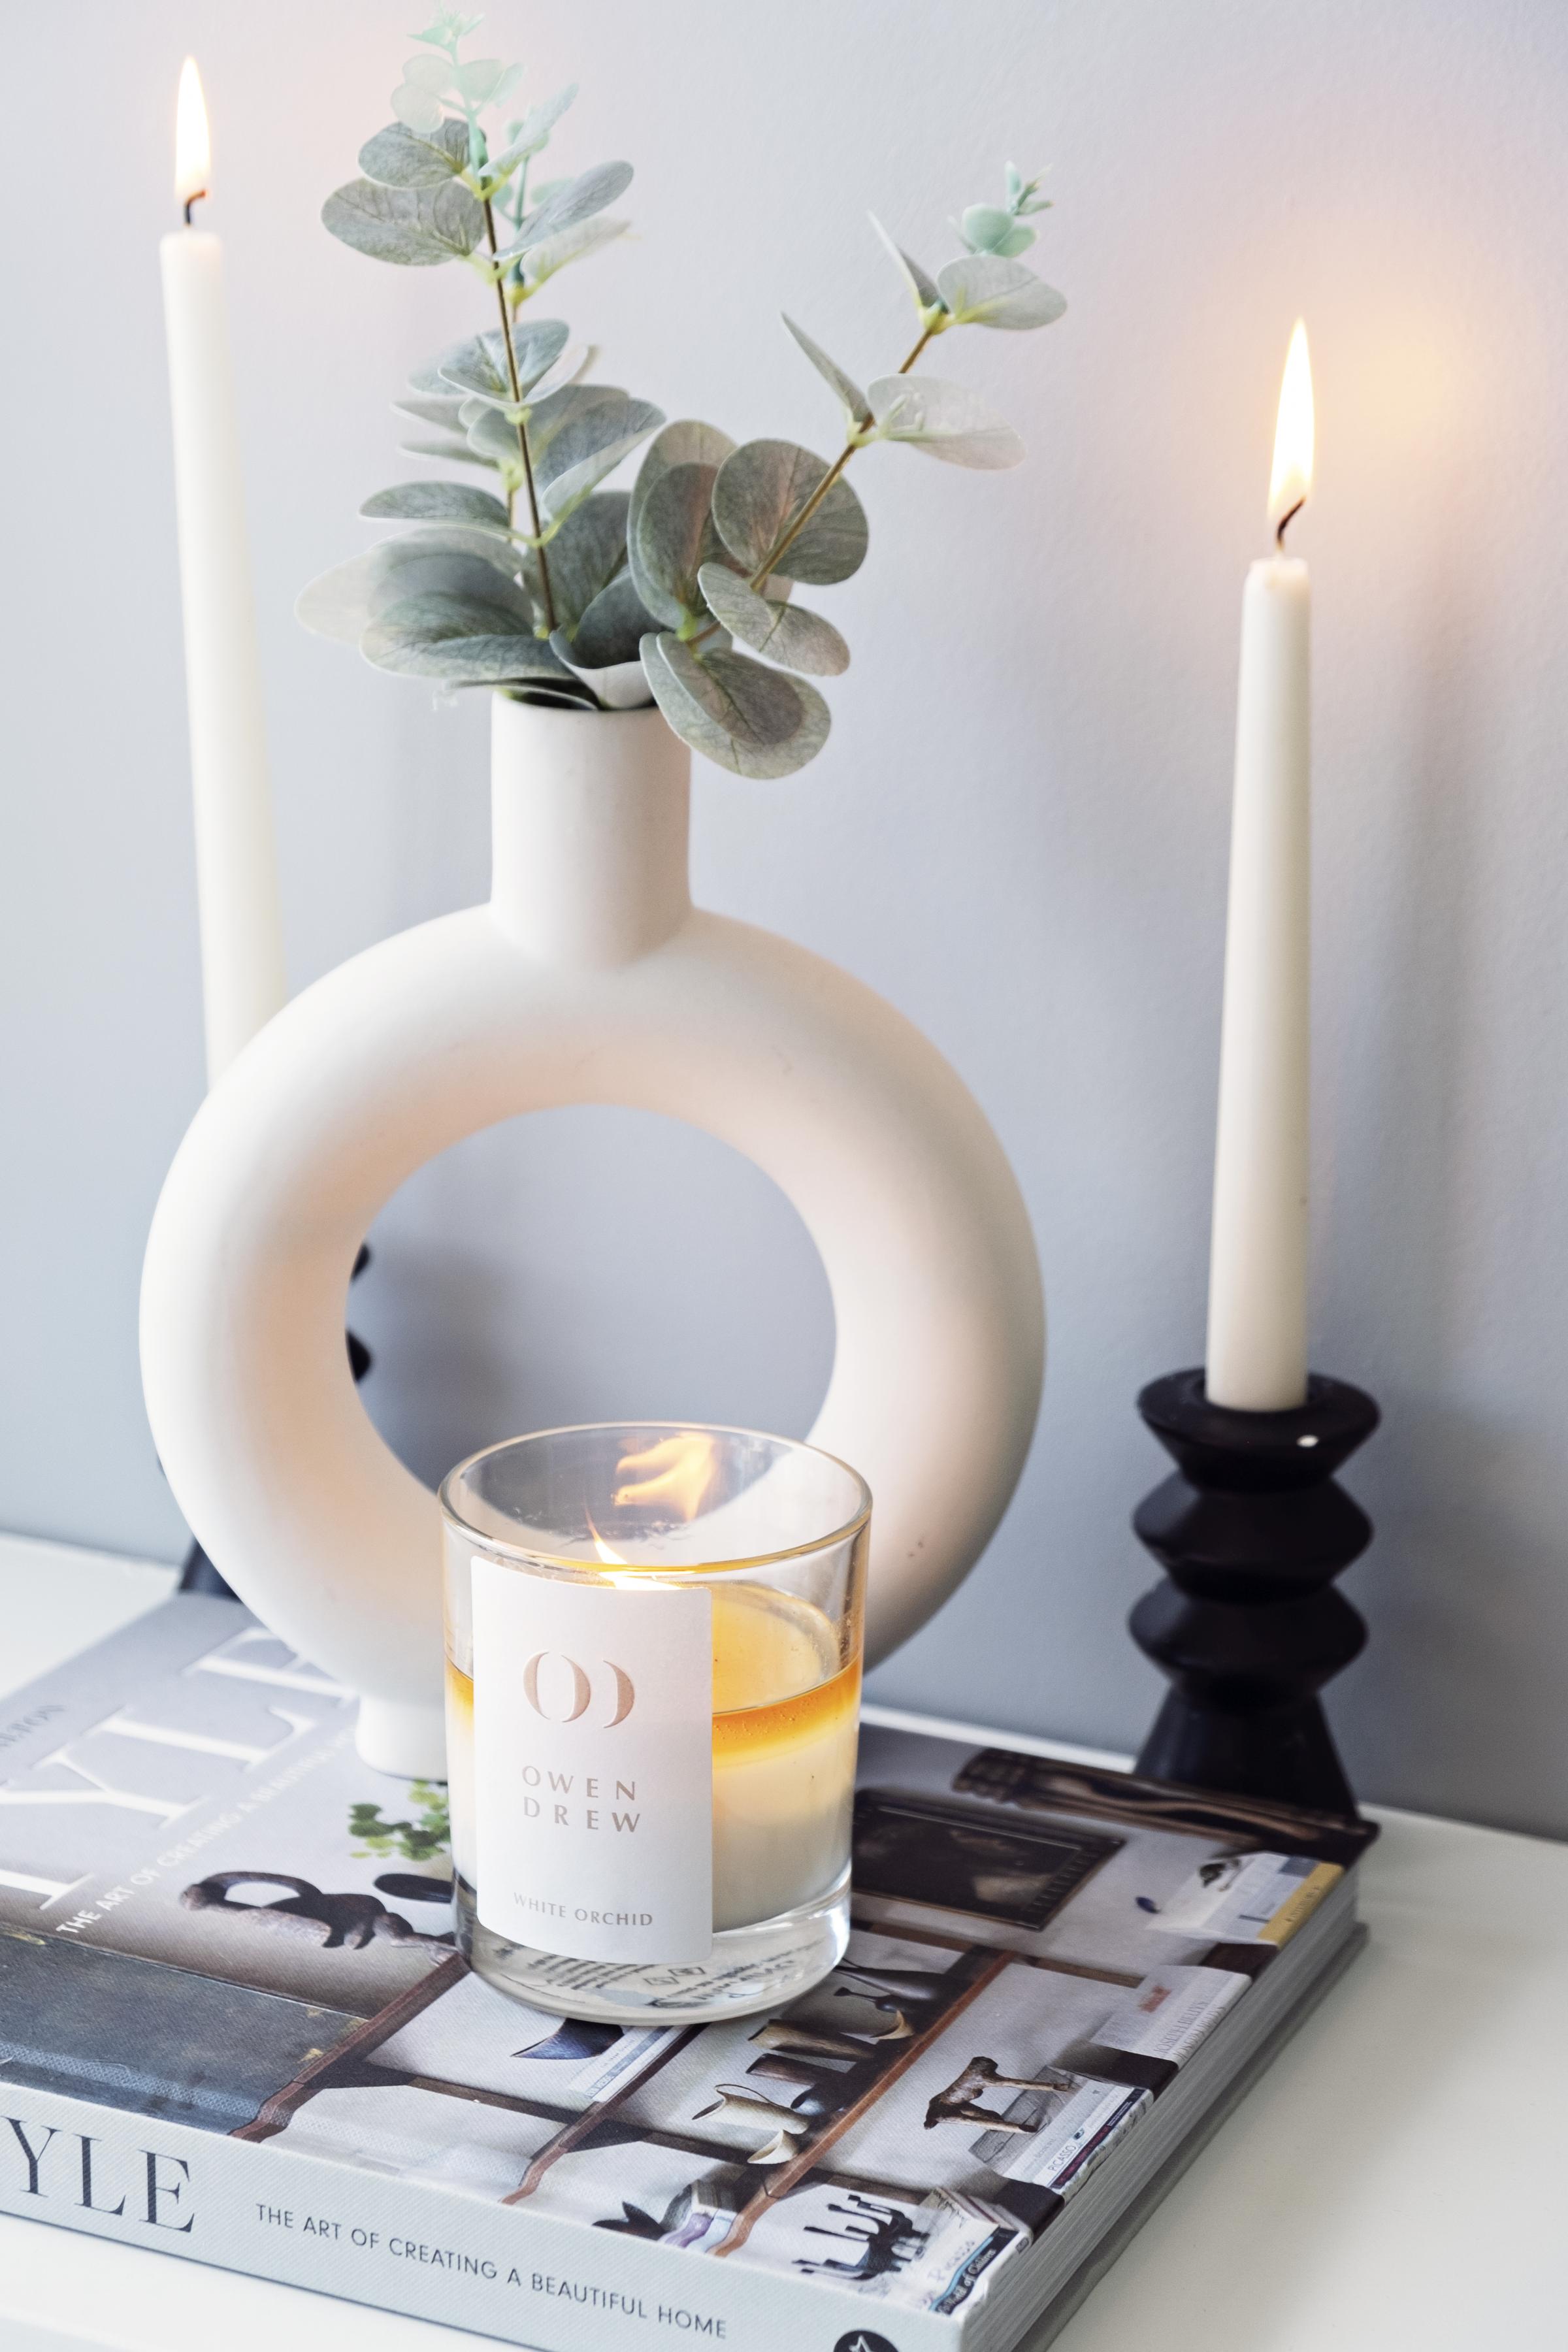 A white orchid candle